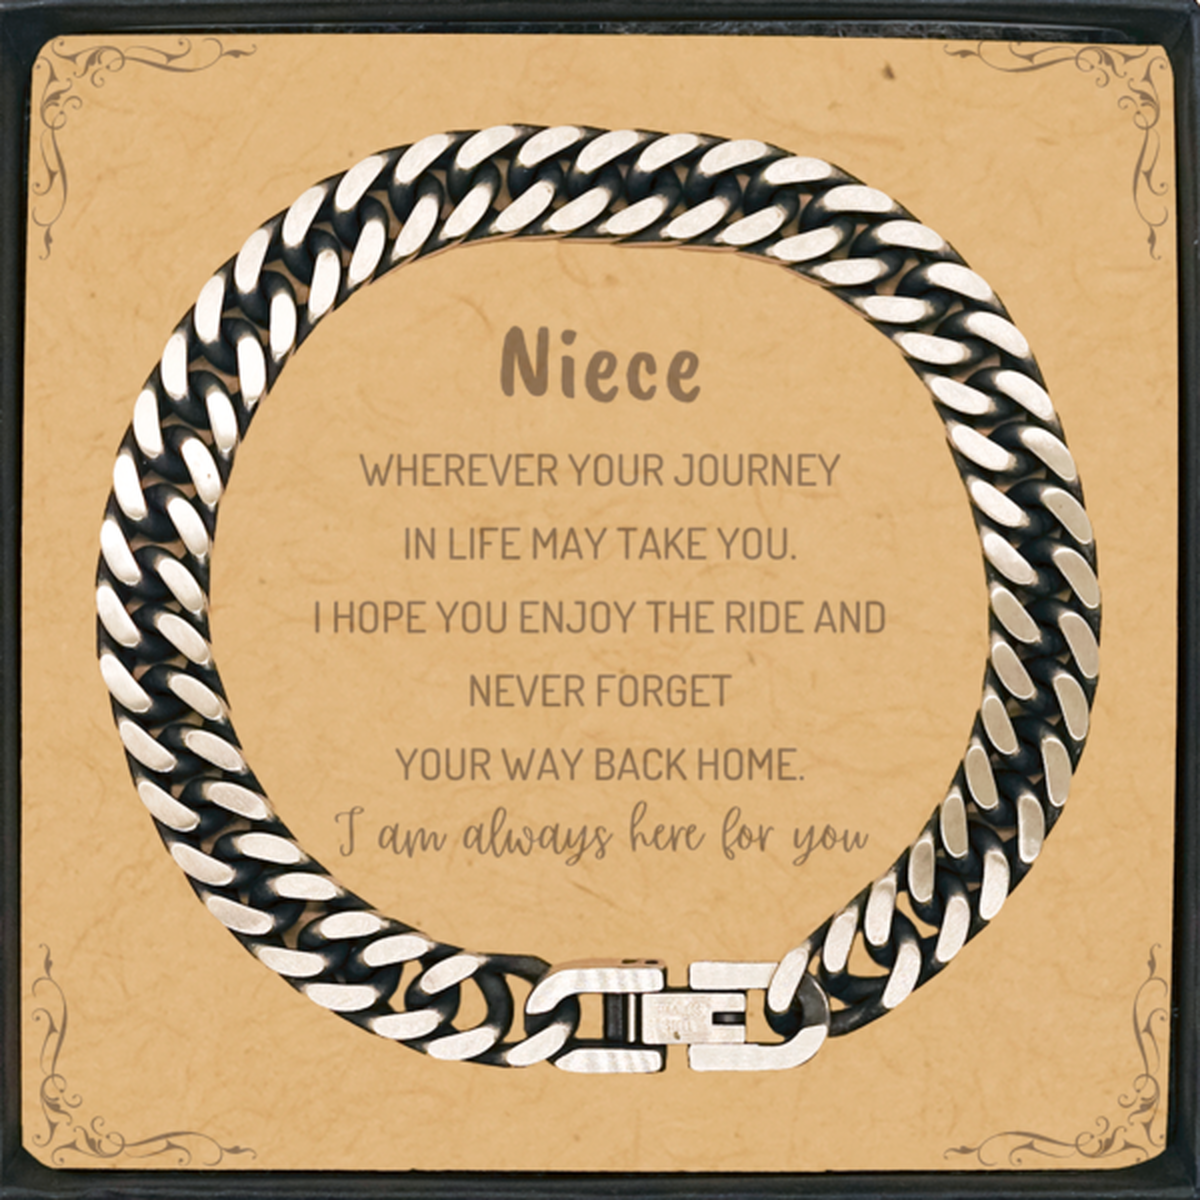 Niece wherever your journey in life may take you, I am always here for you Niece Cuban Link Chain Bracelet, Awesome Christmas Gifts For Niece Message Card, Niece Birthday Gifts for Men Women Family Loved One